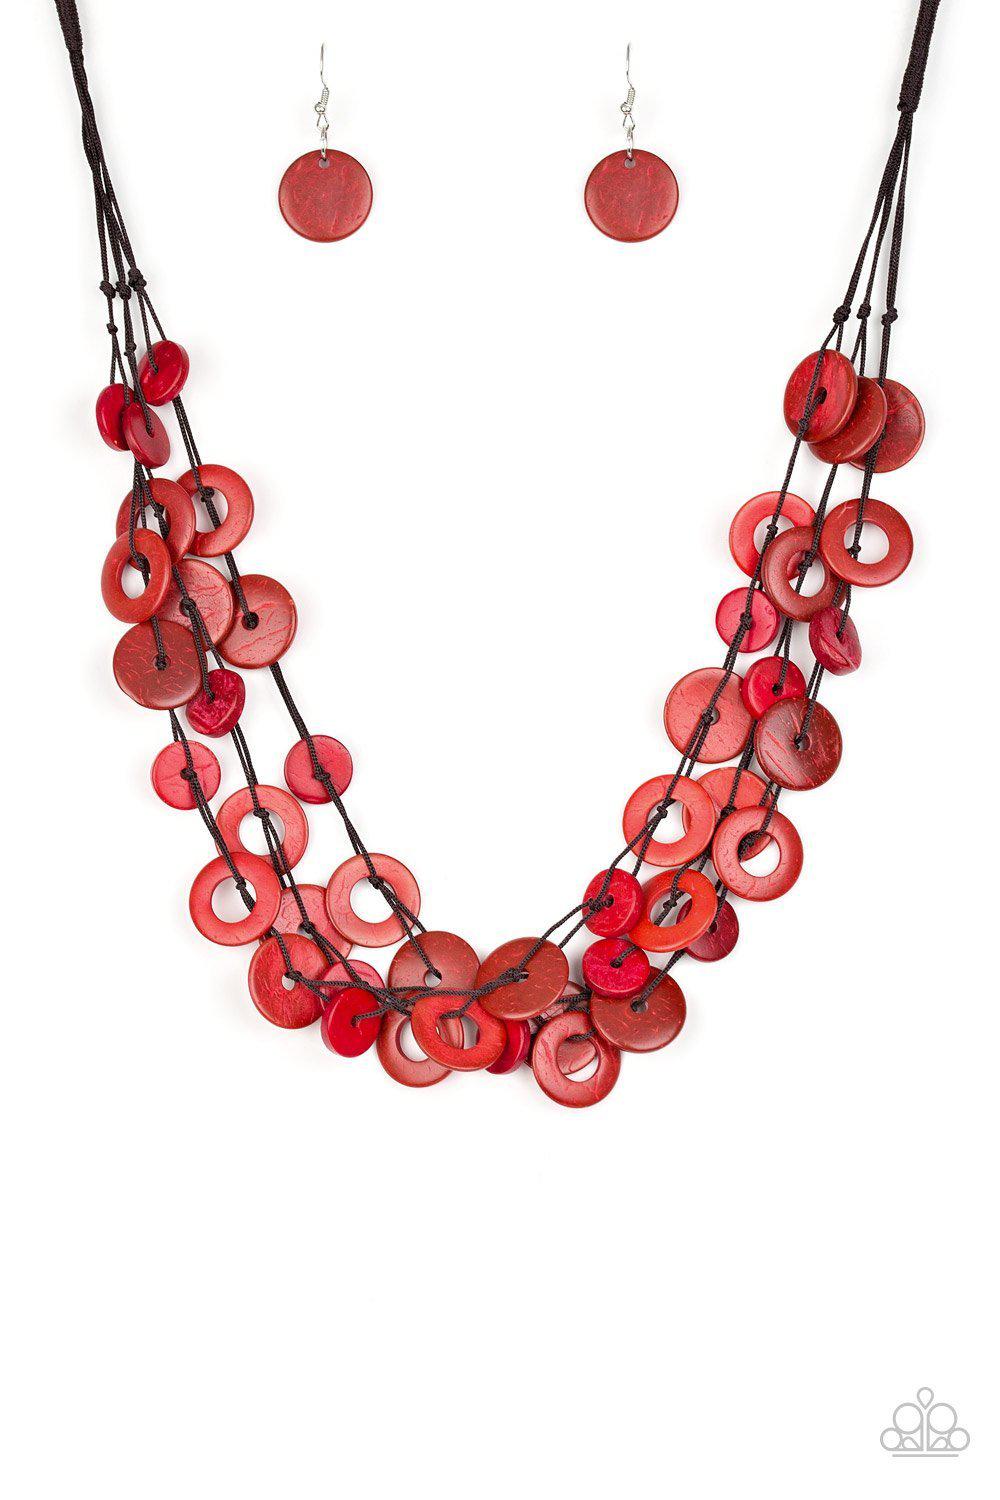 Wonderfully Walla Walla Red Wood Necklace - Paparazzi Accessories-CarasShop.com - $5 Jewelry by Cara Jewels